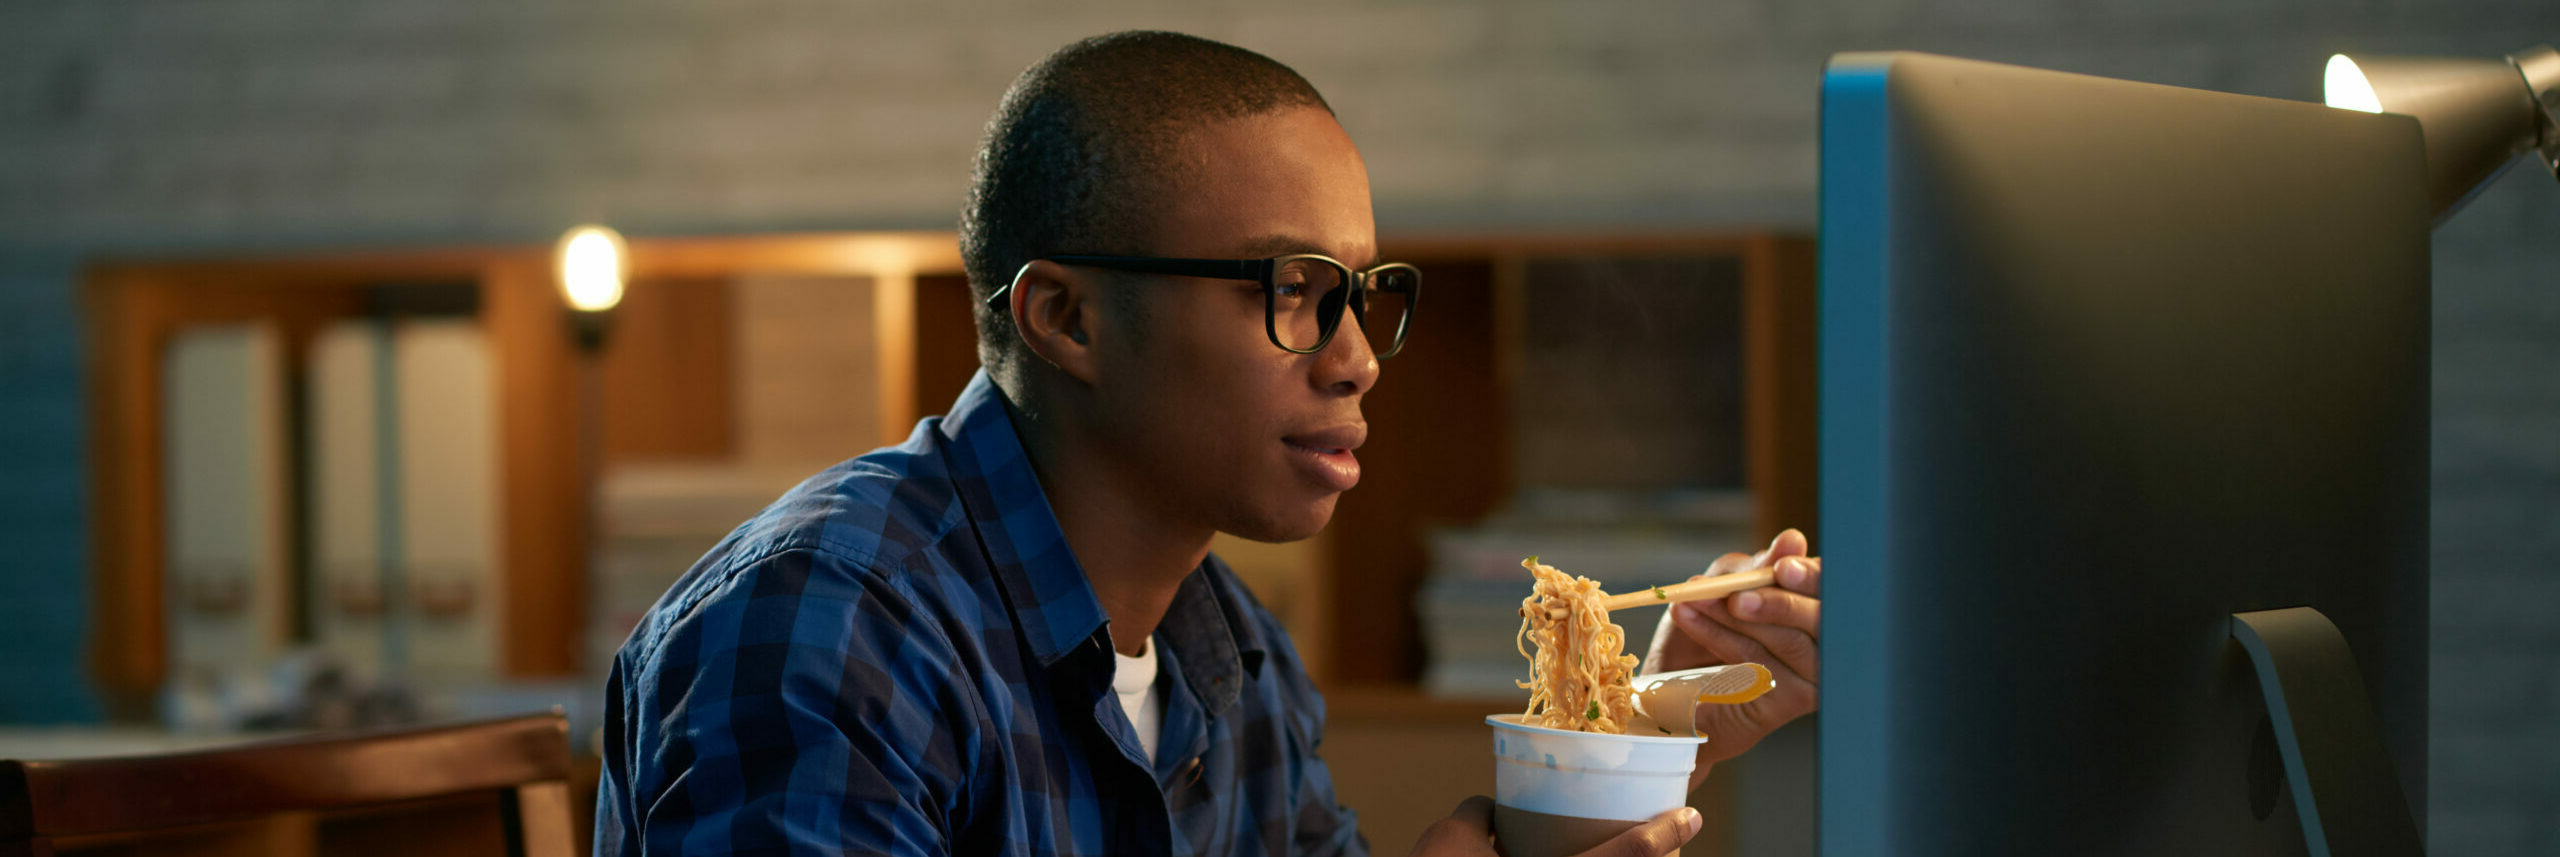 Black man eating noodles while working at computer